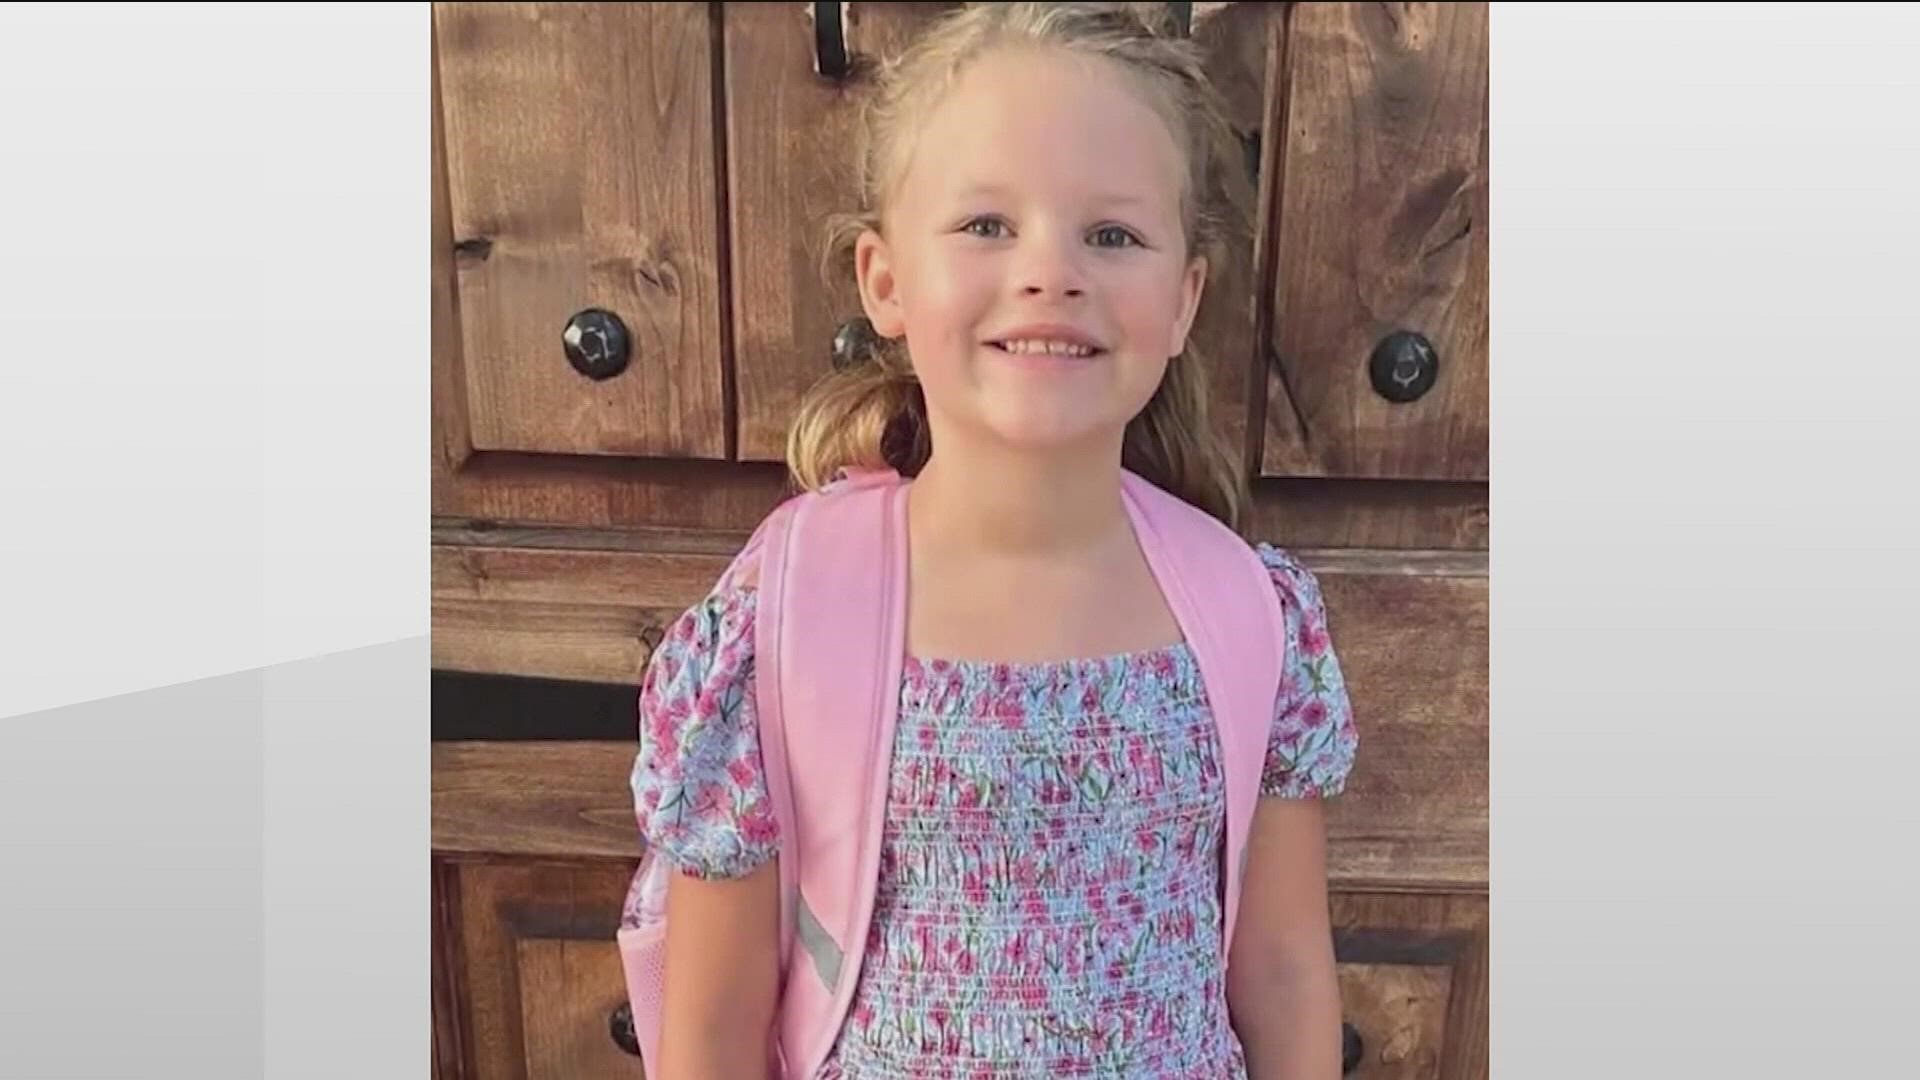 Strand's body was found Friday. A FedEx driver was arrested on kidnapping and murder charges after confessing to killing the 7-year-old.